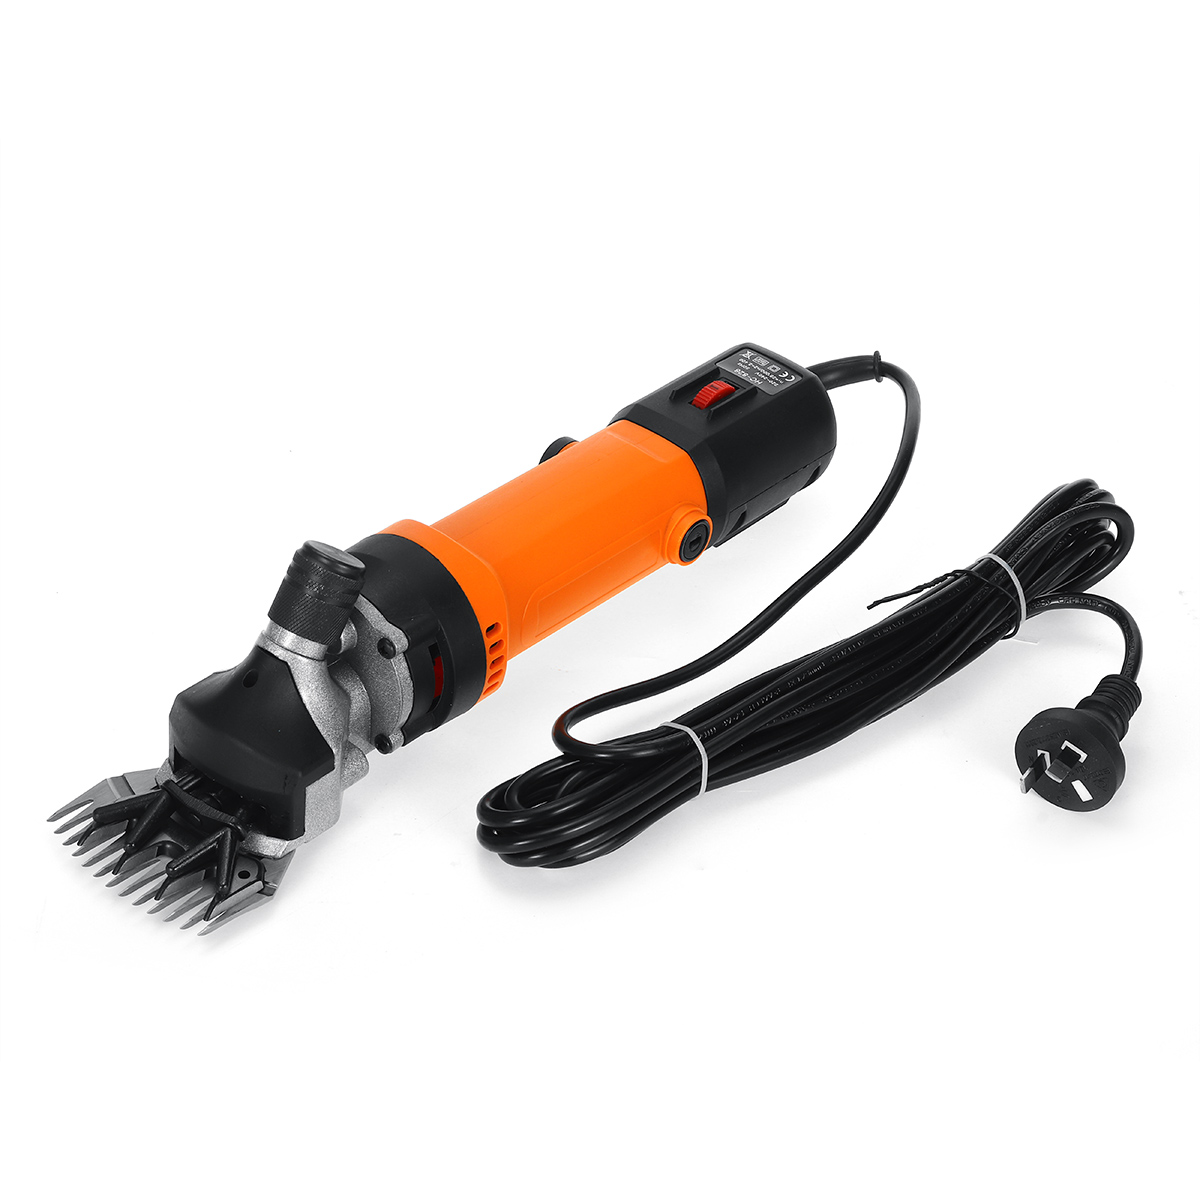 Find 960W 2400RPM Shears Alpaca Farm Electric Sheep Shearing Goats Clipper Shear for Sale on Gipsybee.com with cryptocurrencies